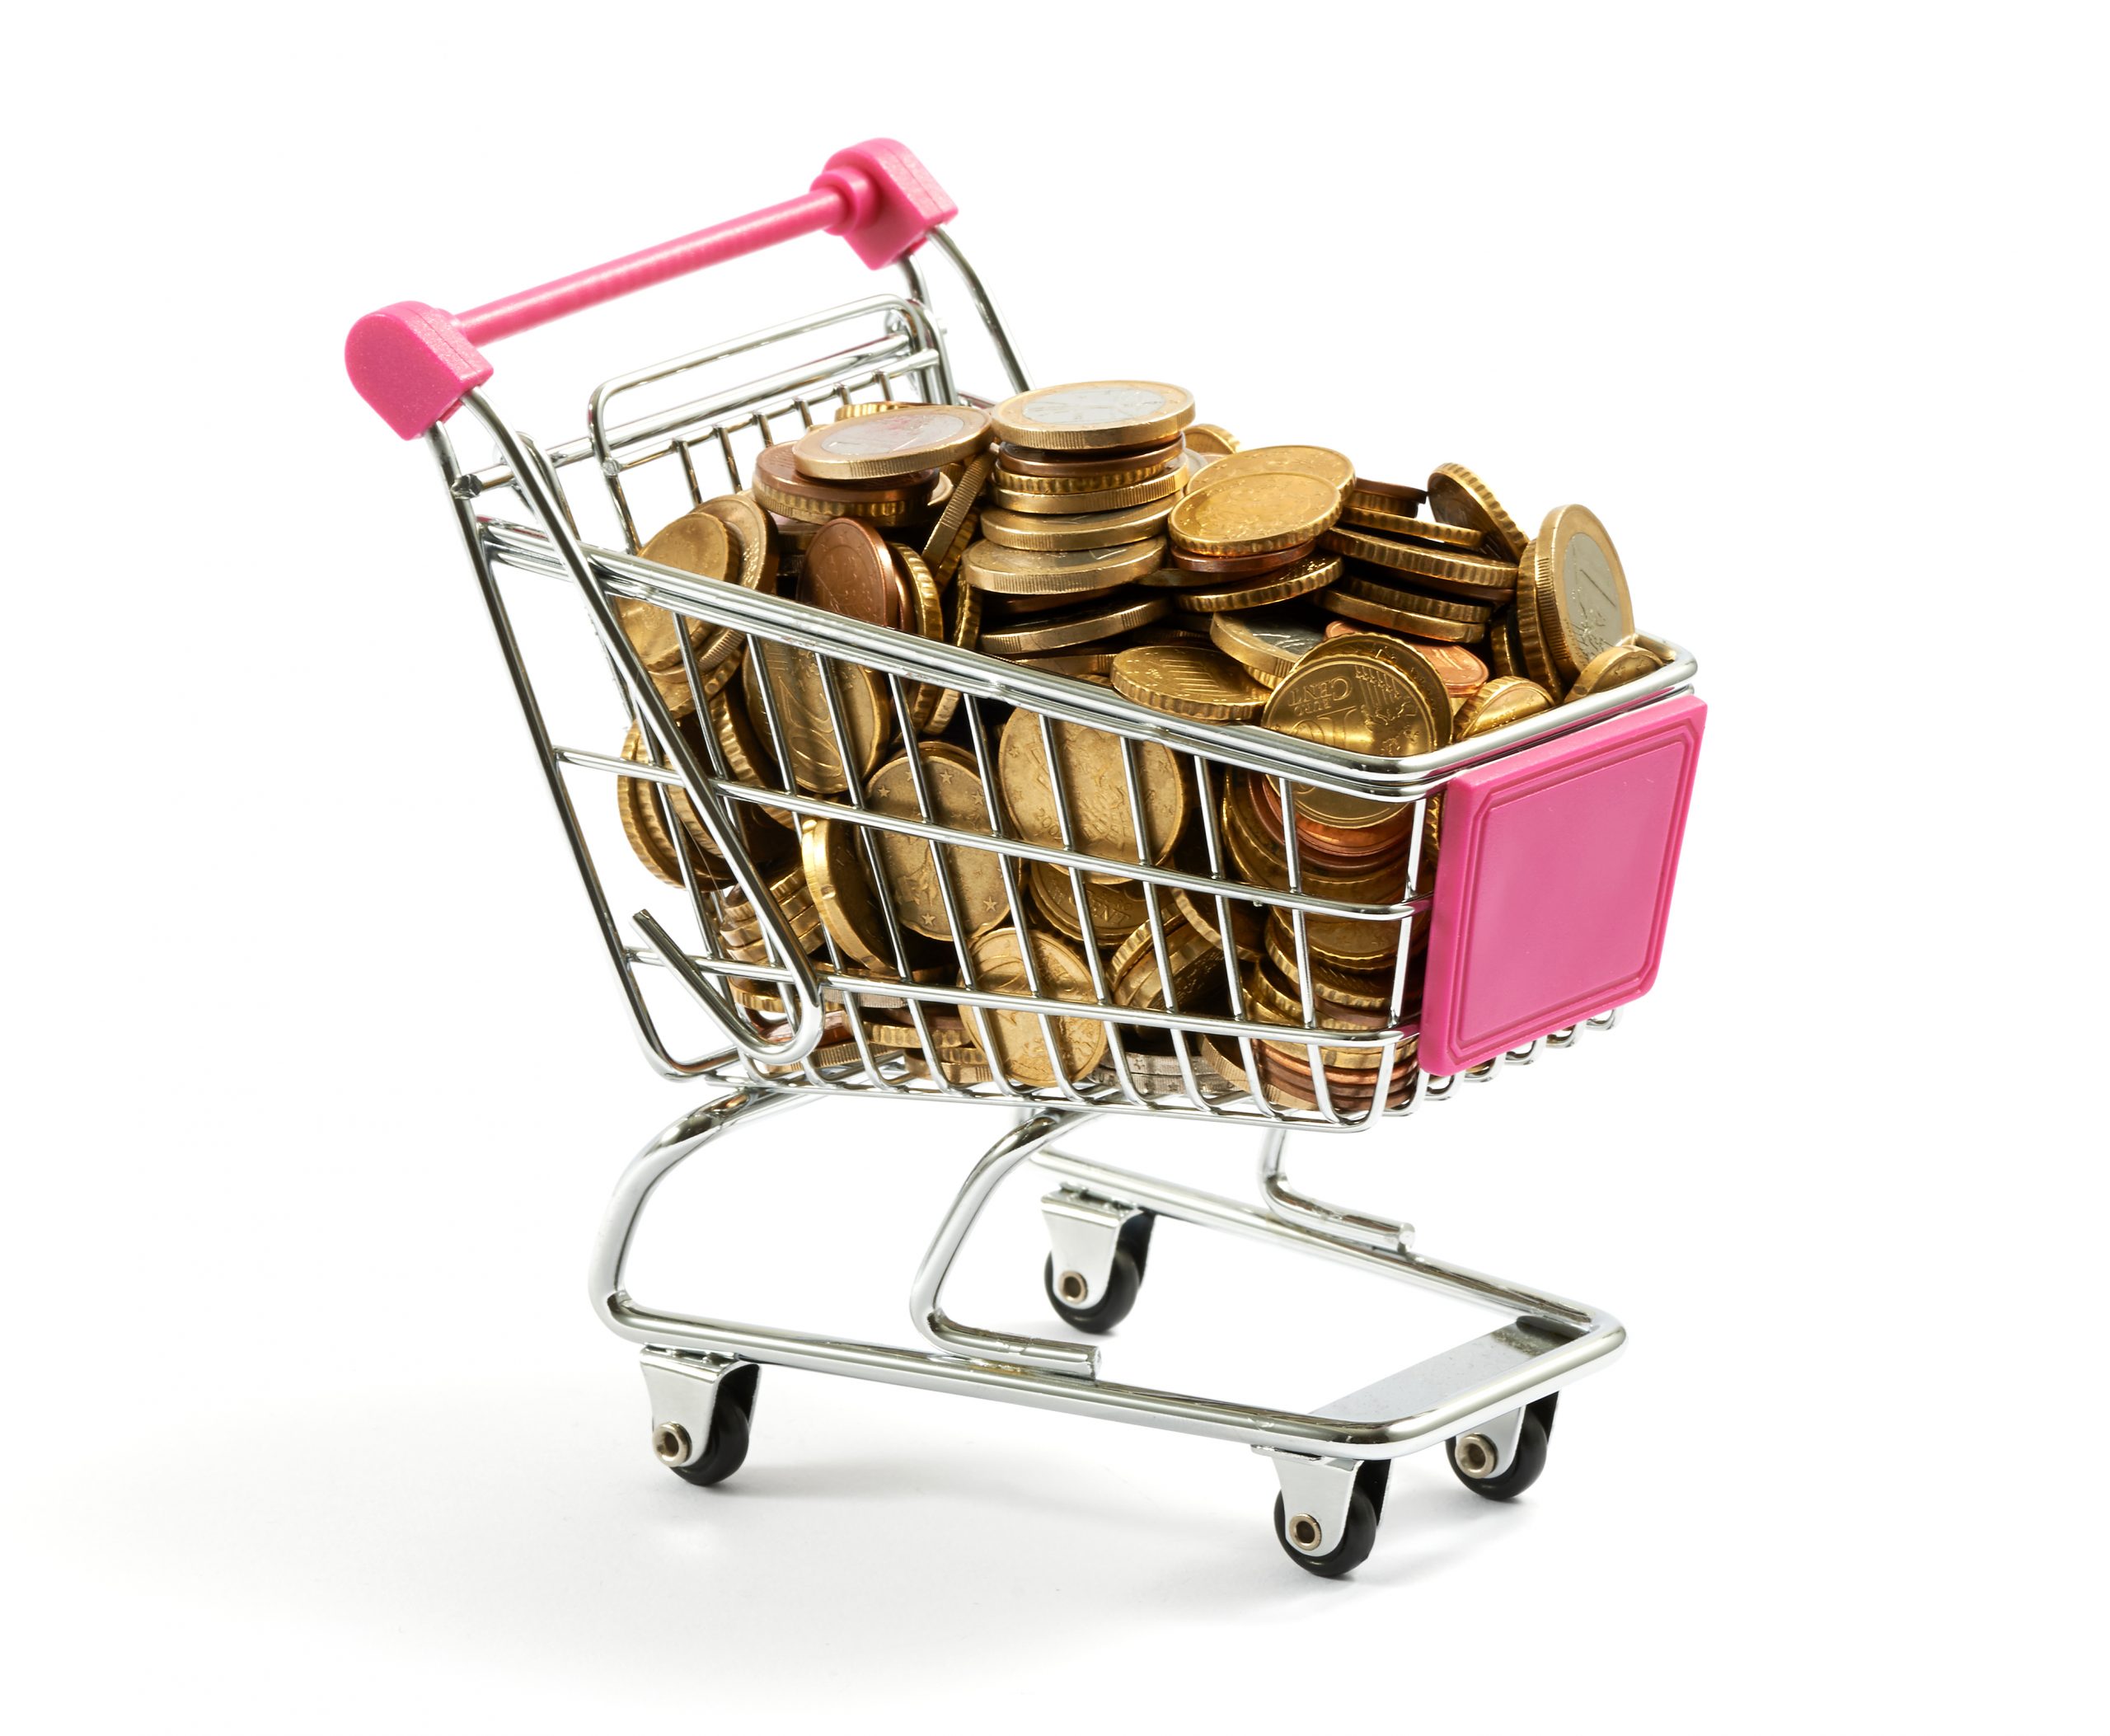 Selling on Amazon depicted by coins in a trolley